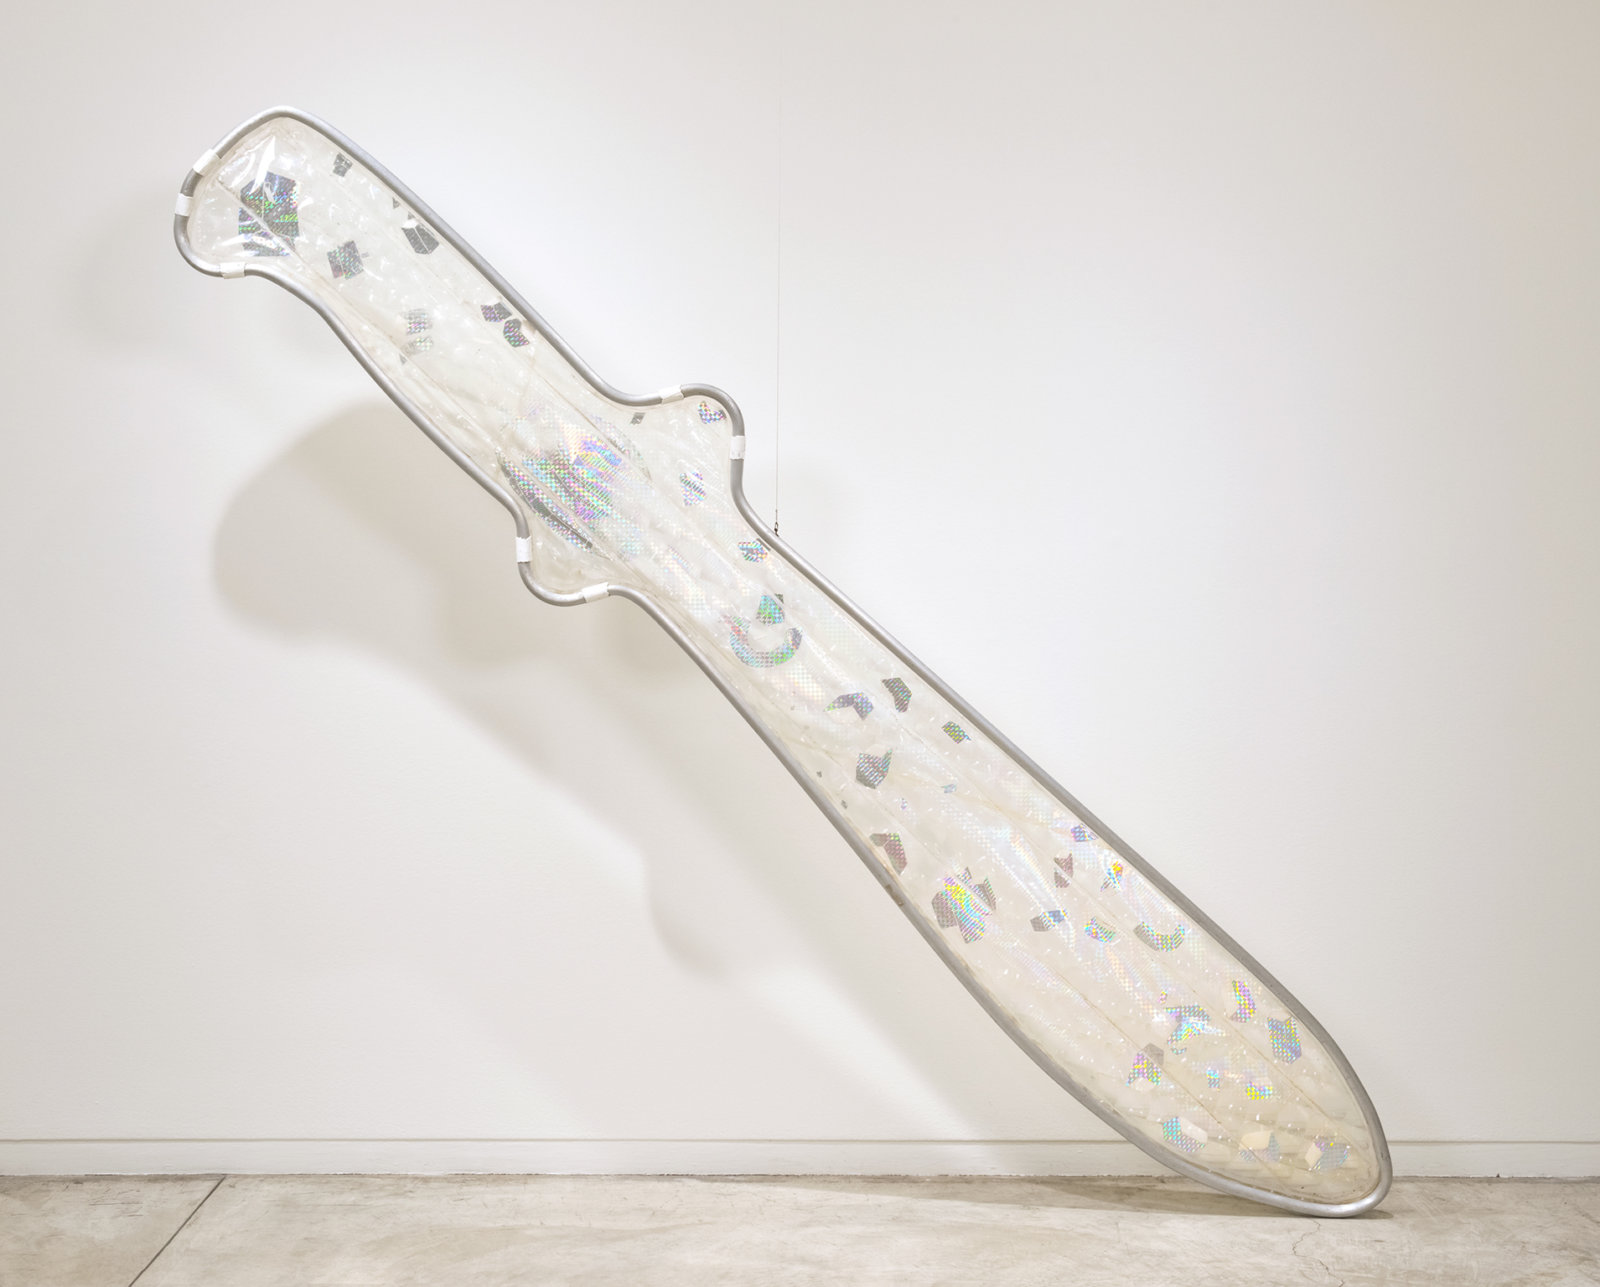 Jerry Pethick, Snow Knife Floating in Memory, 1978–1979, fresnel lens sheet, etched diffraction grating, aluminum, silicone, 120 x 21 x 2 in. (305 x 53 x 5 cm)